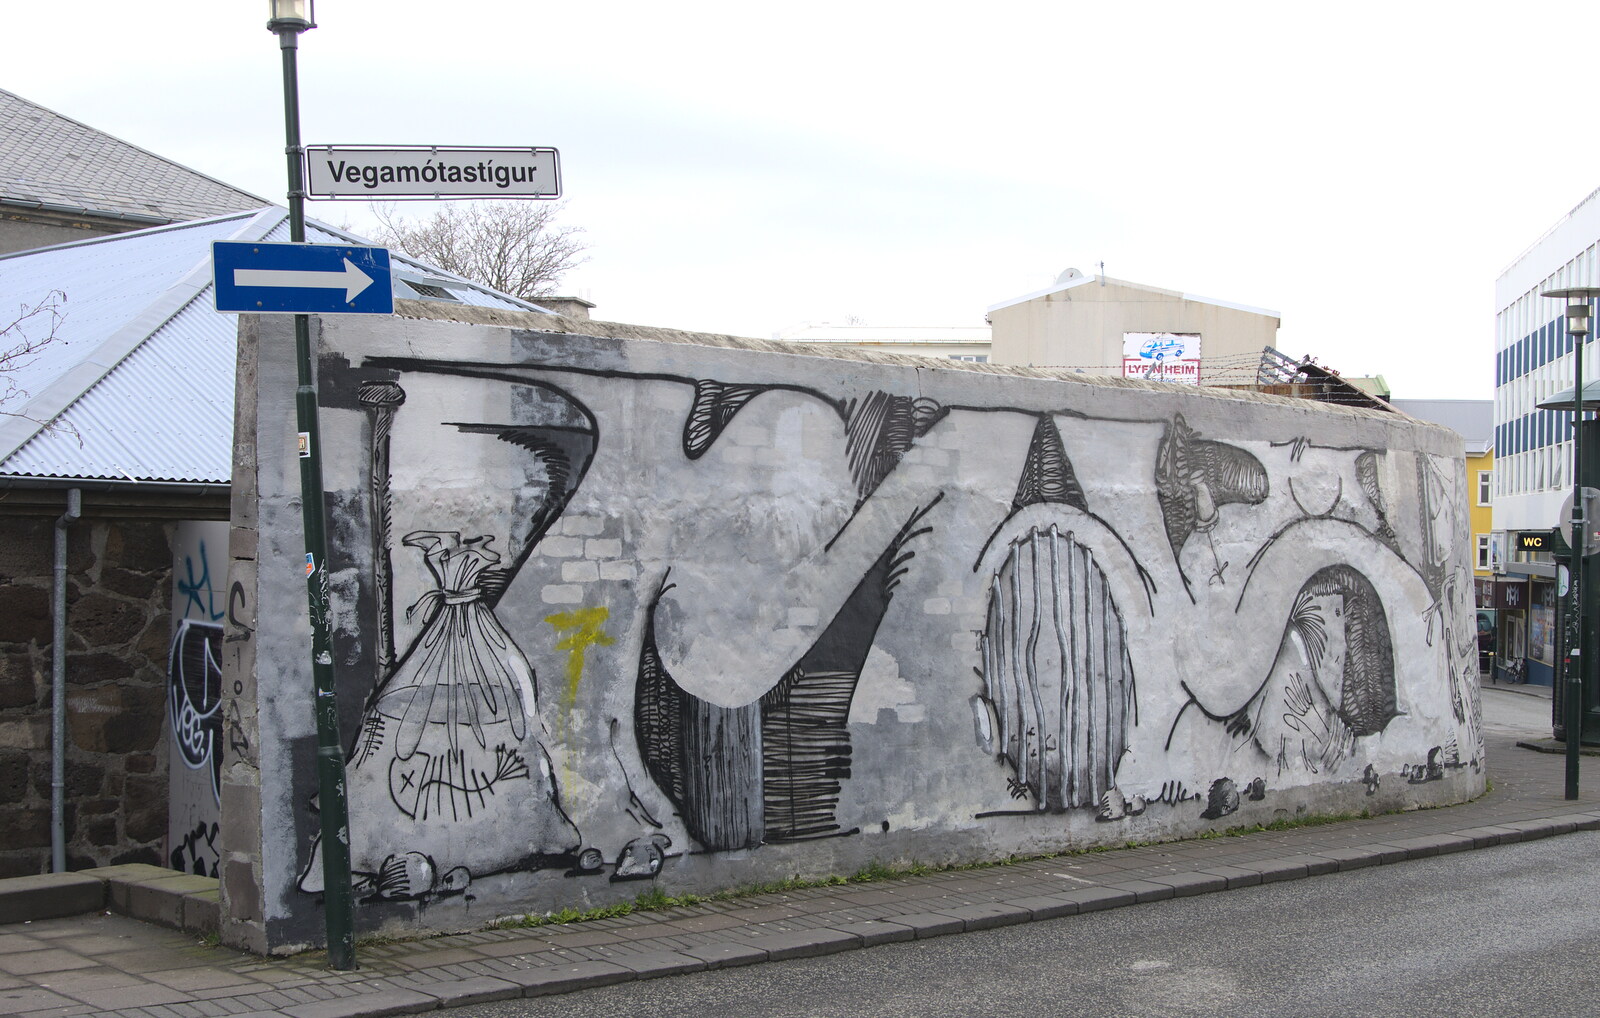 More street art/graffiti from Hallgrímskirkja Cathedral and Whale Watching, Reykjavik - 21st April 2017